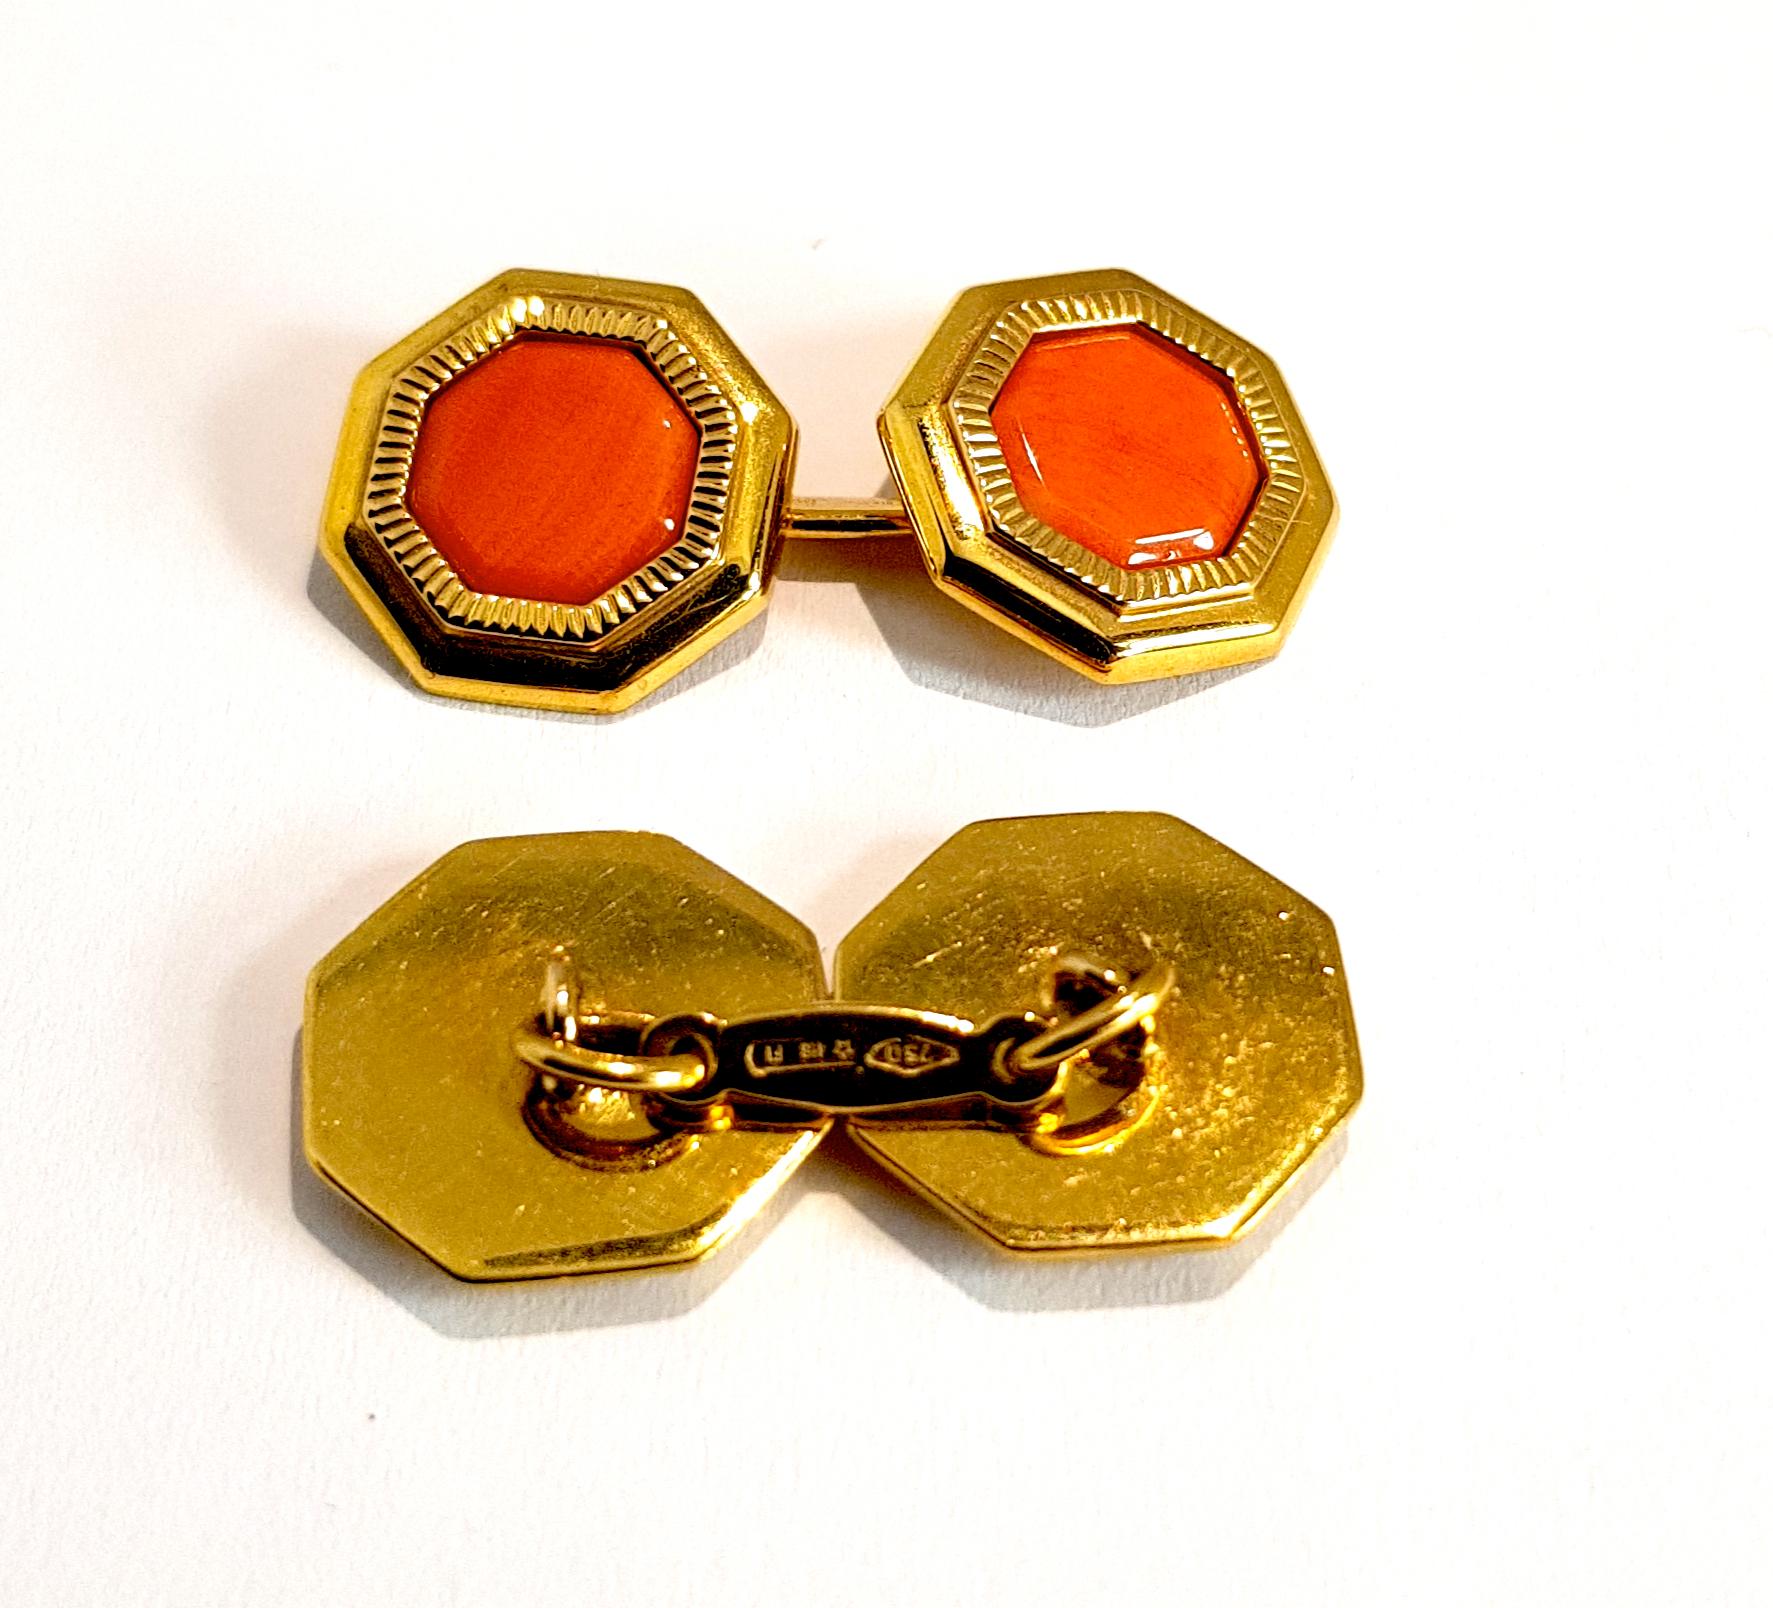 READY TO SHIP
*Shipment of this piece is not affected by COVID-19. 
Orders welcome!*
MATERIALS
◘ Weight 17,1gr
◘ Made from 100% recycled gold
◘ Soft edges for a comfort fit
Just a few things make a man of class stand out. 
Cufflinks, a watch and a